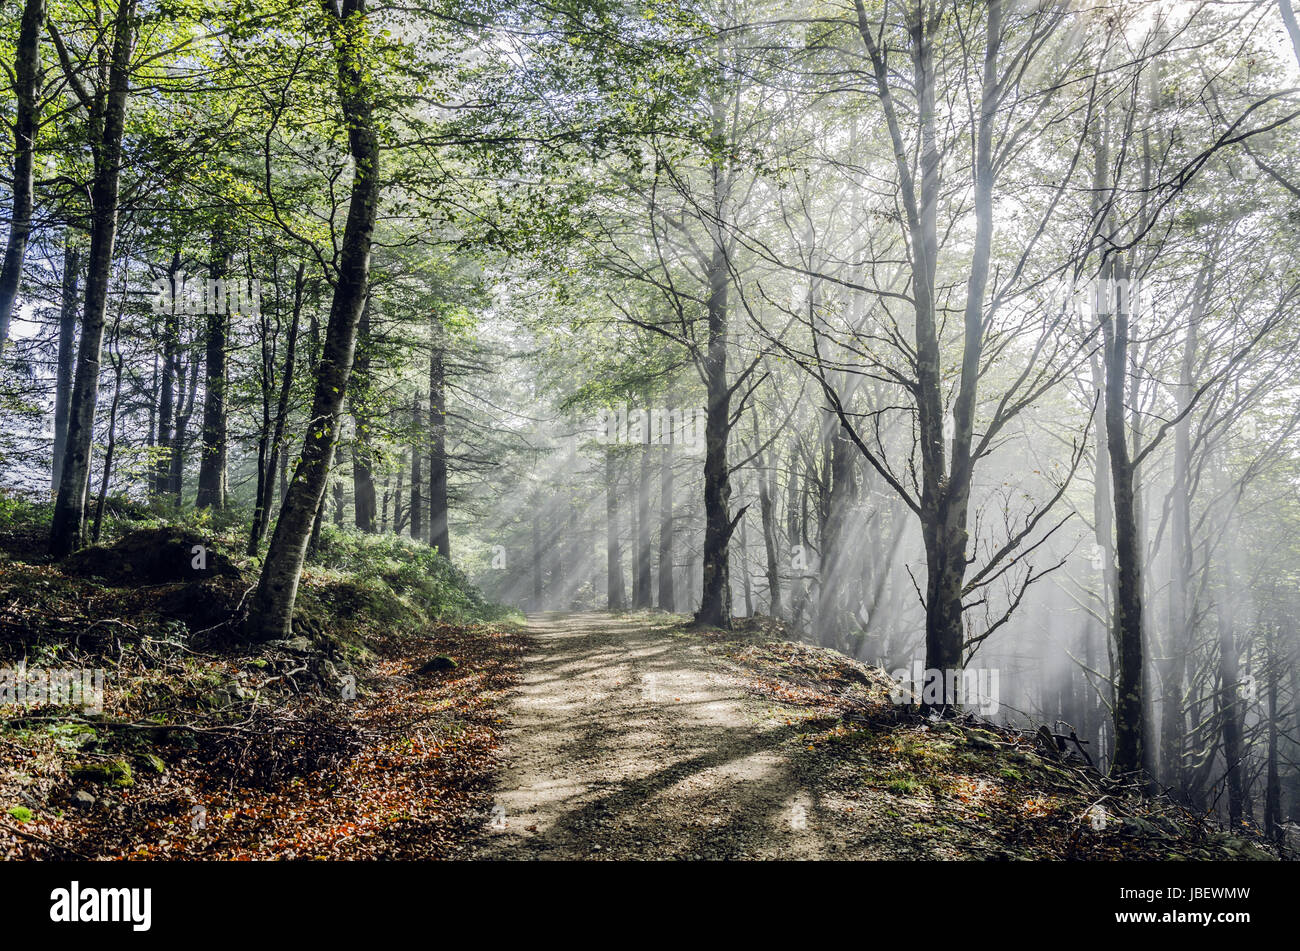 Beautiful nature photography inside the fores in Spain. The fog is adding mysticle atmosphere in this otherwhise boring forest, The road tru the forest is making the picture more dramatic. Stock Photo